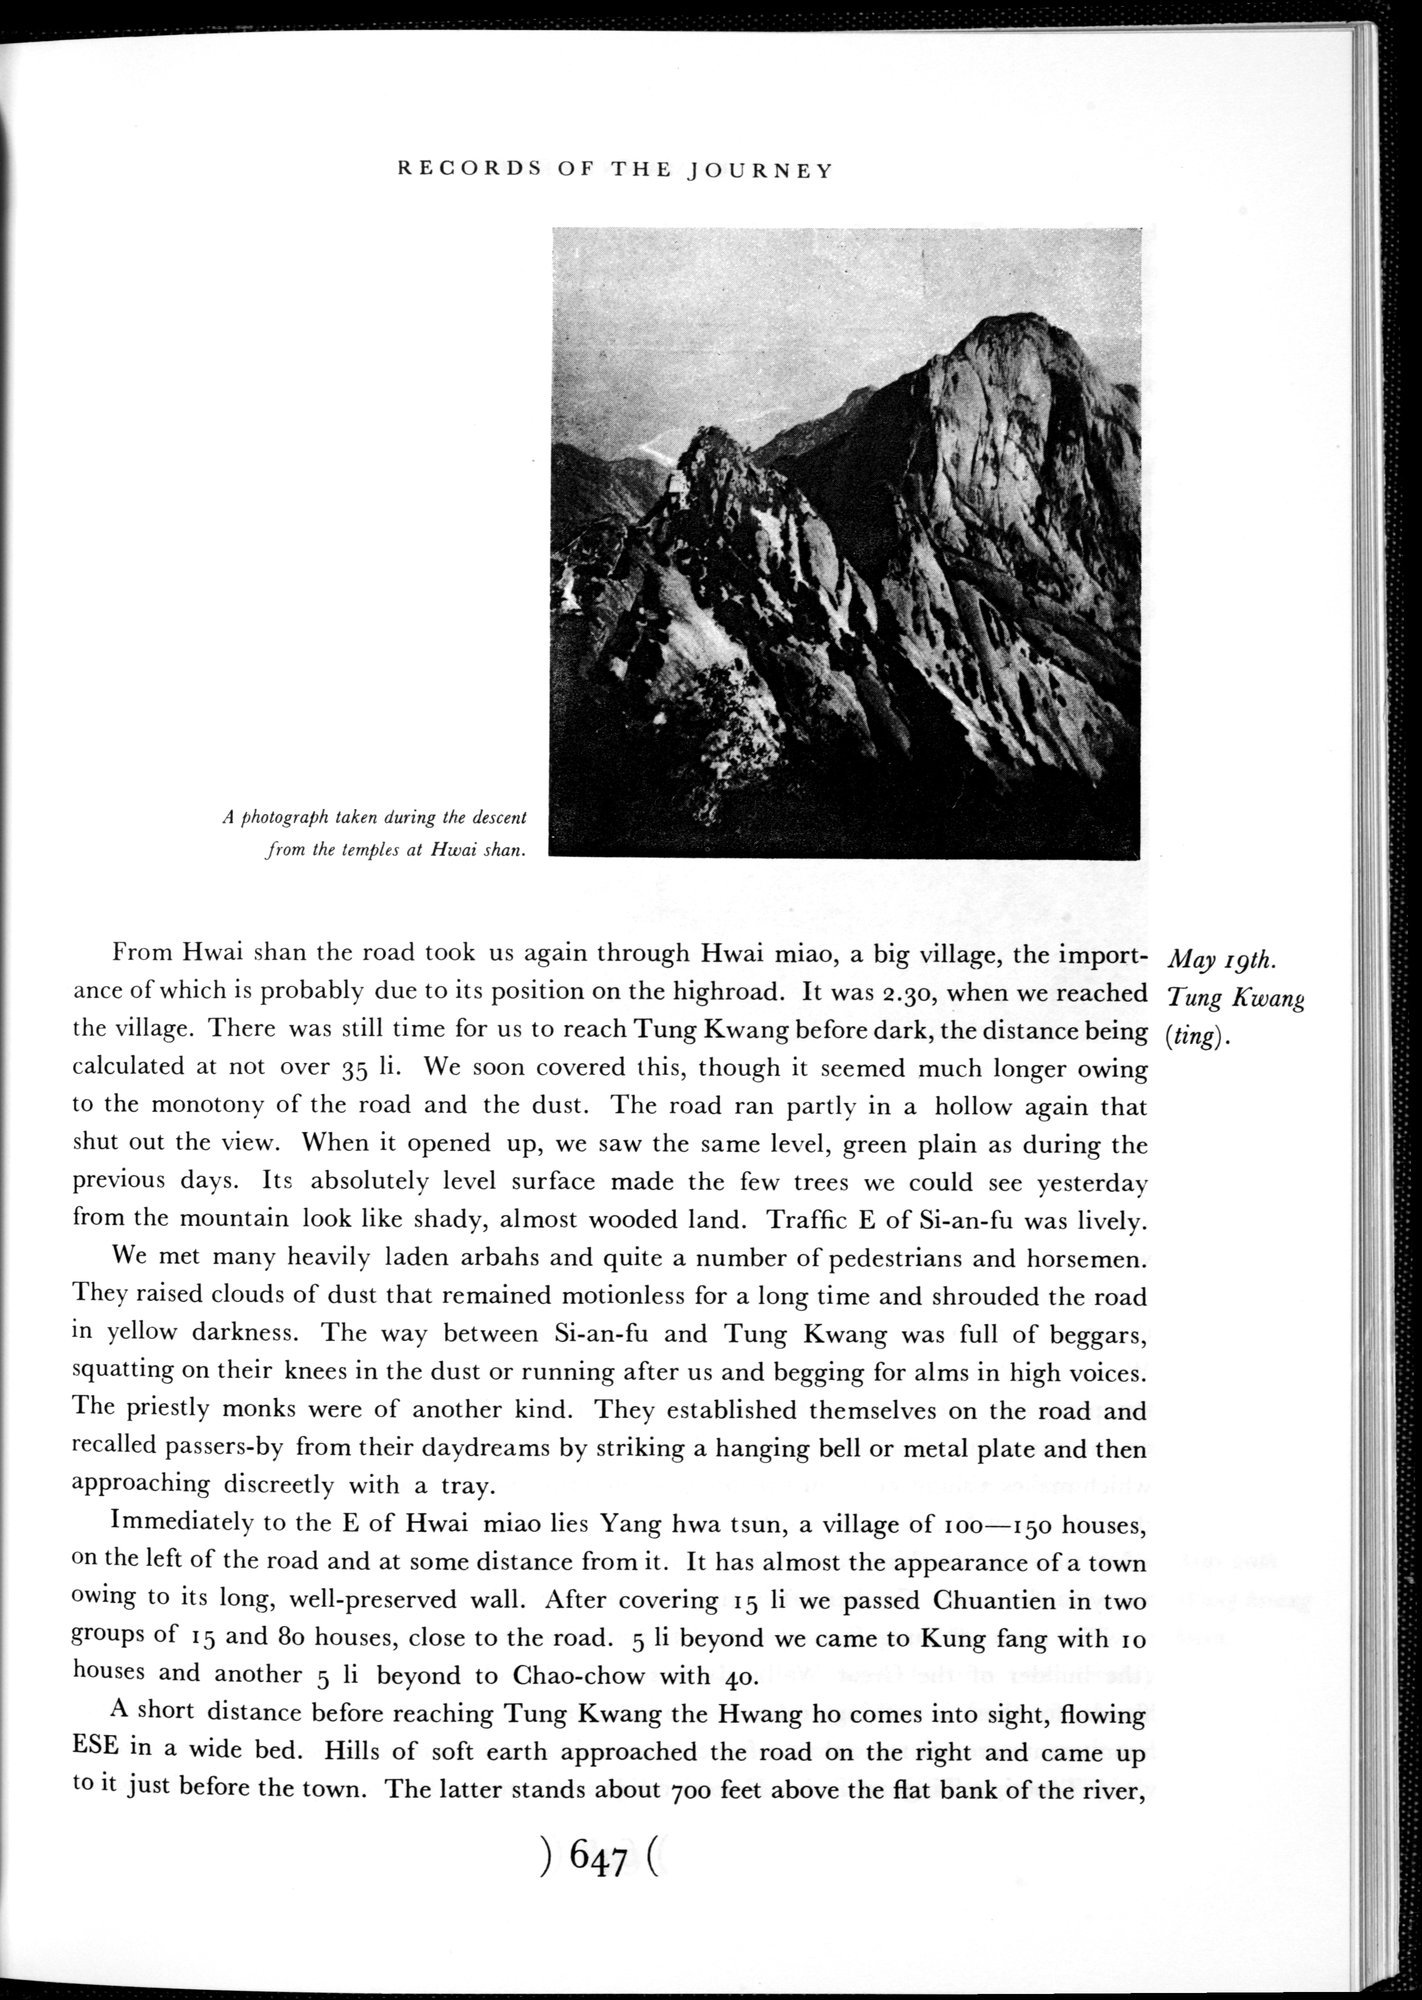 Across Asia : vol.1 / Page 653 (Grayscale High Resolution Image)